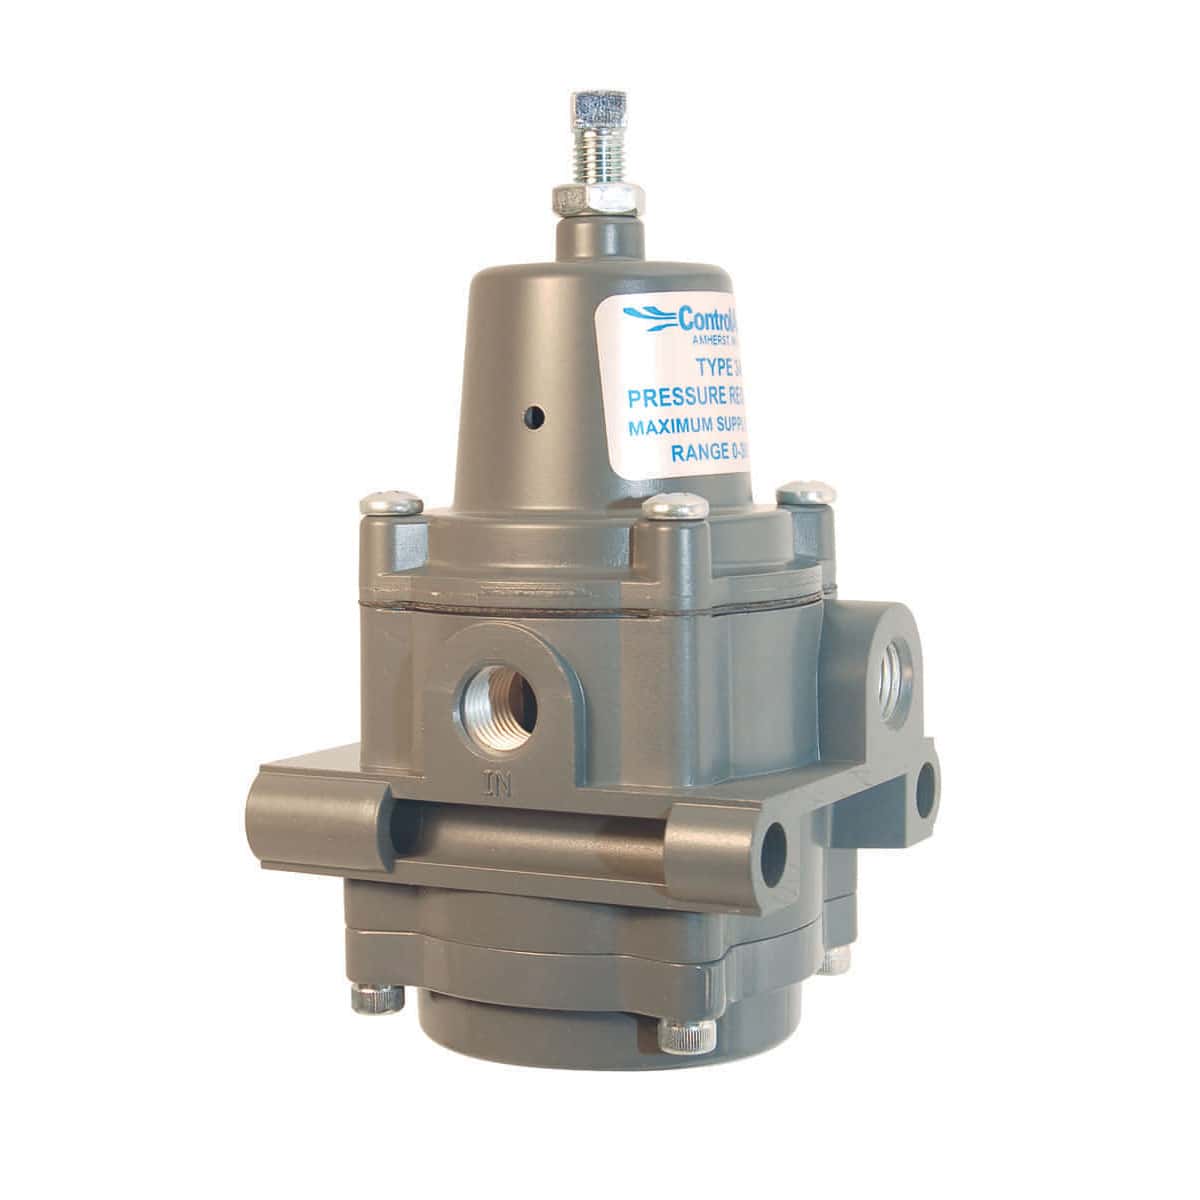 Details about   Global Pressure Control GFC-340 Cut-out 126 psi cut-in 264 psi 